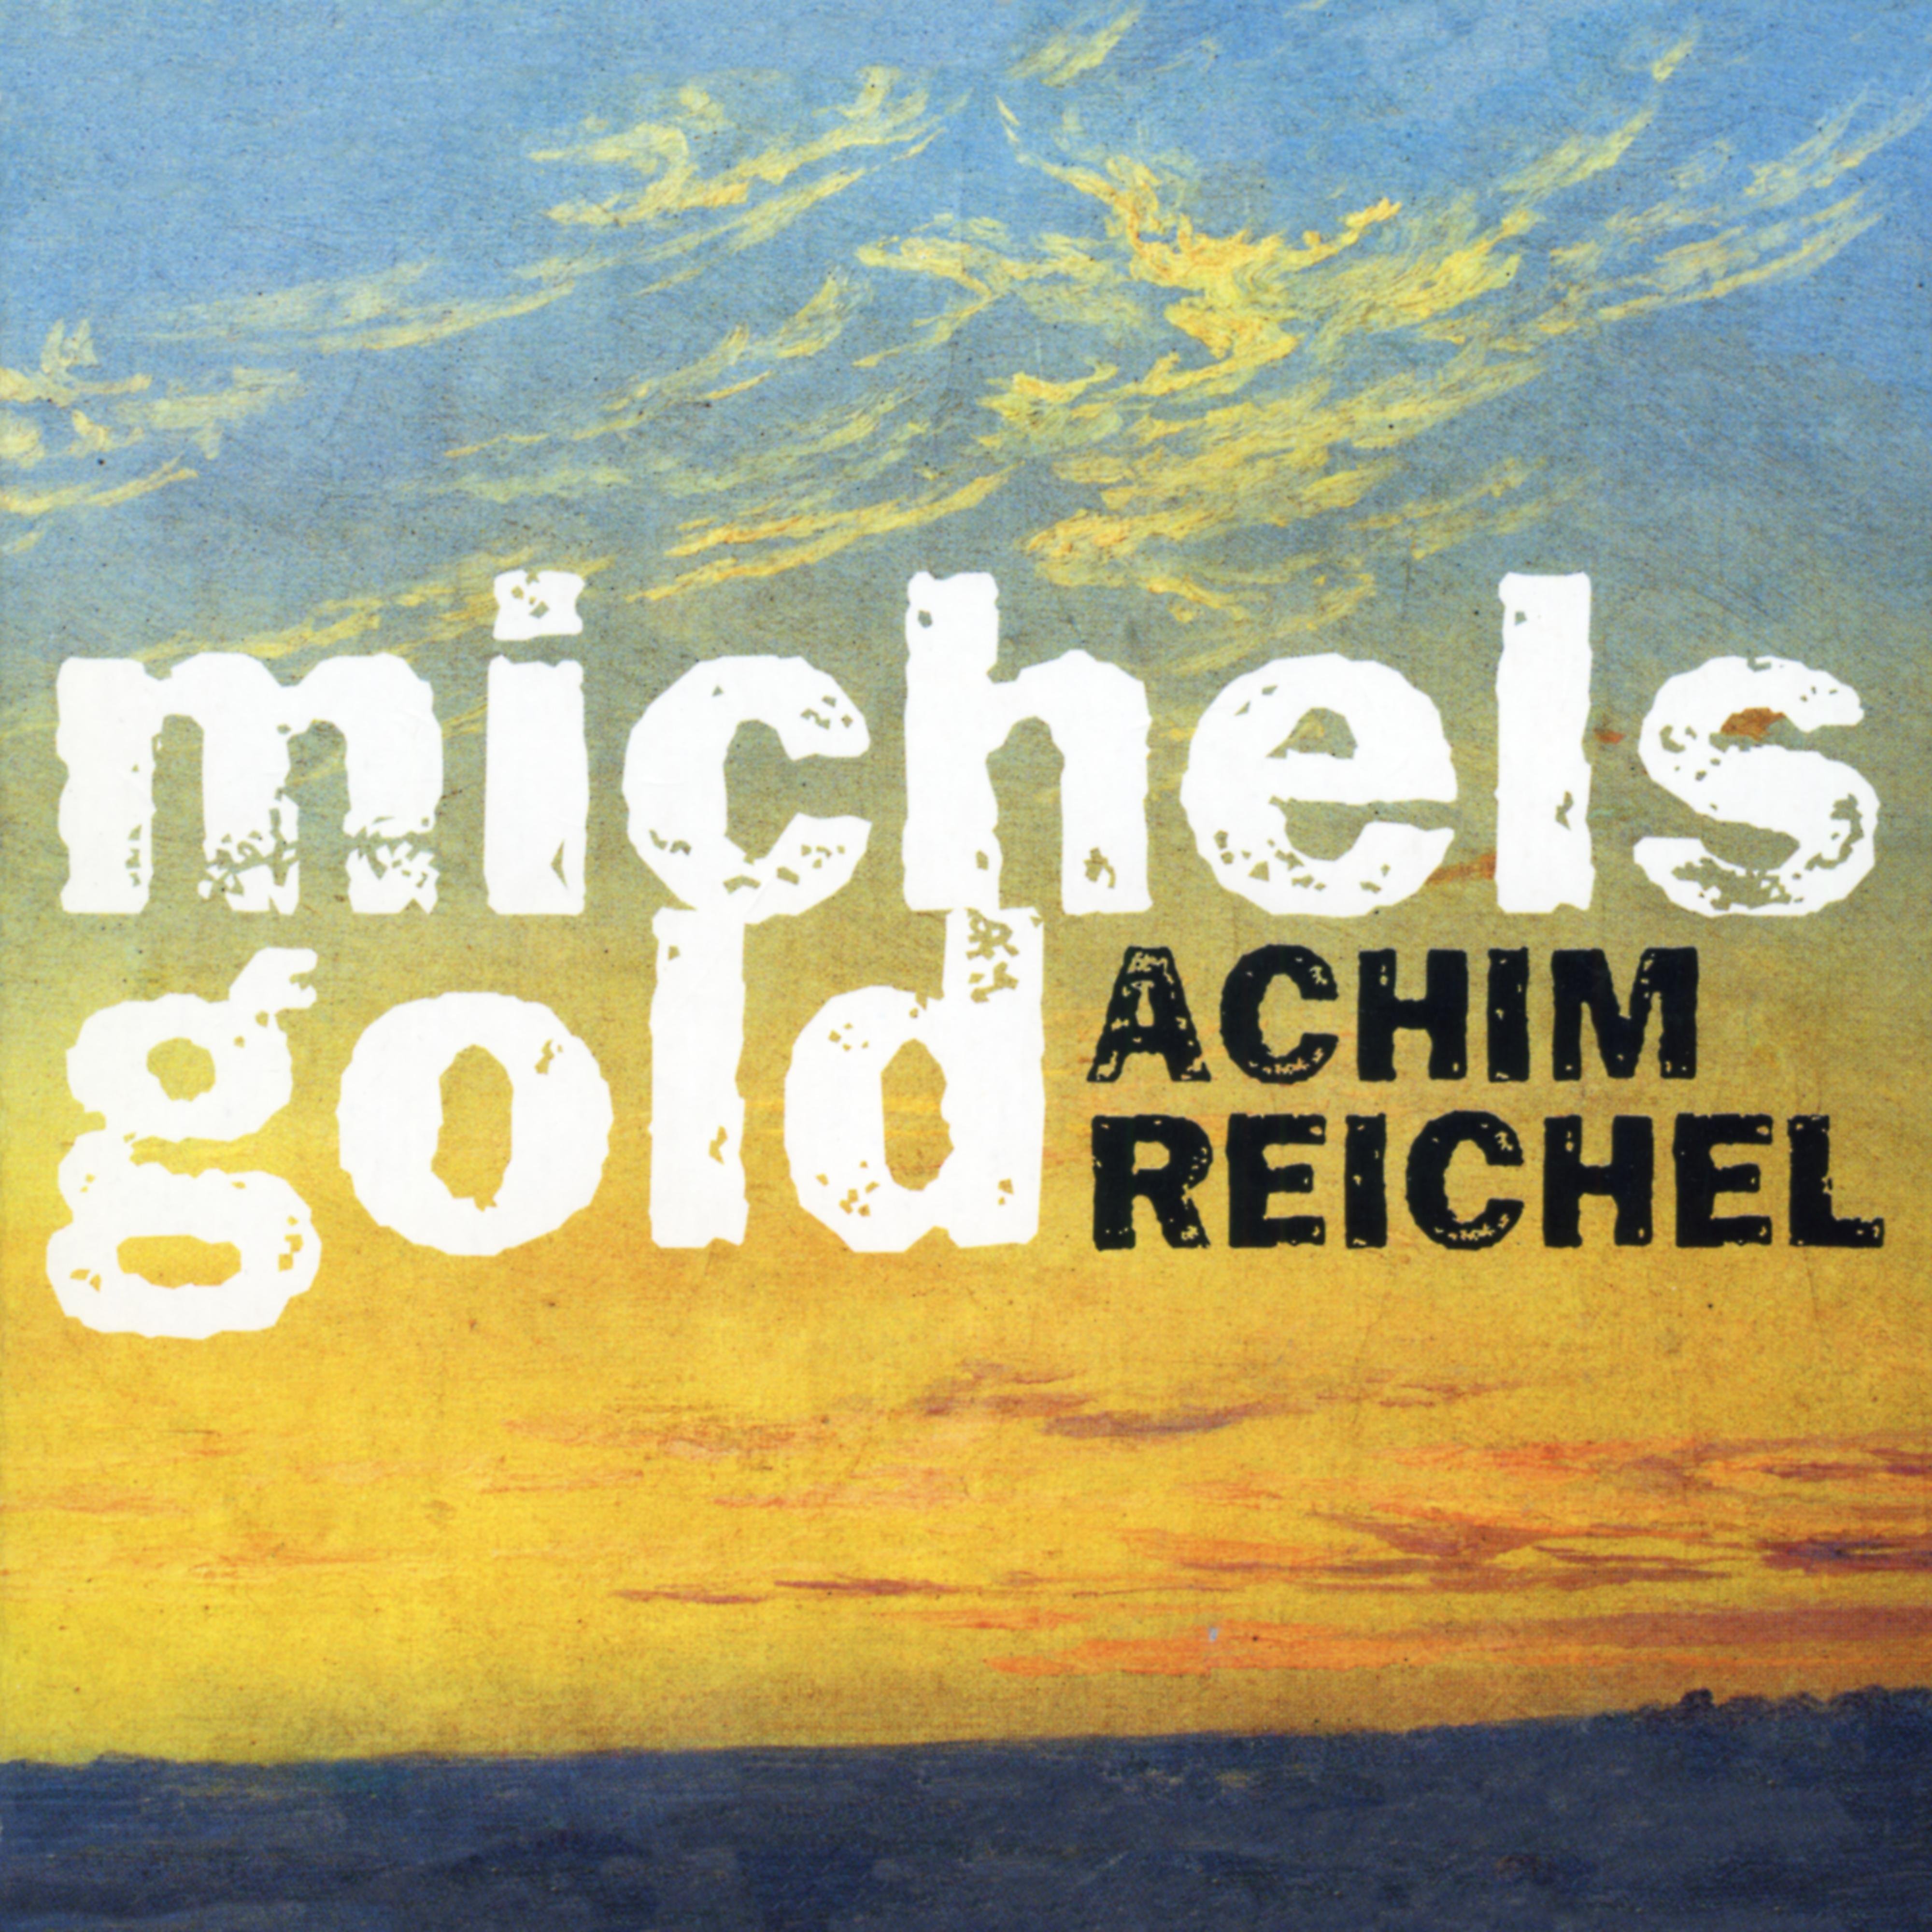 Michels Gold (Deluxe Edition)